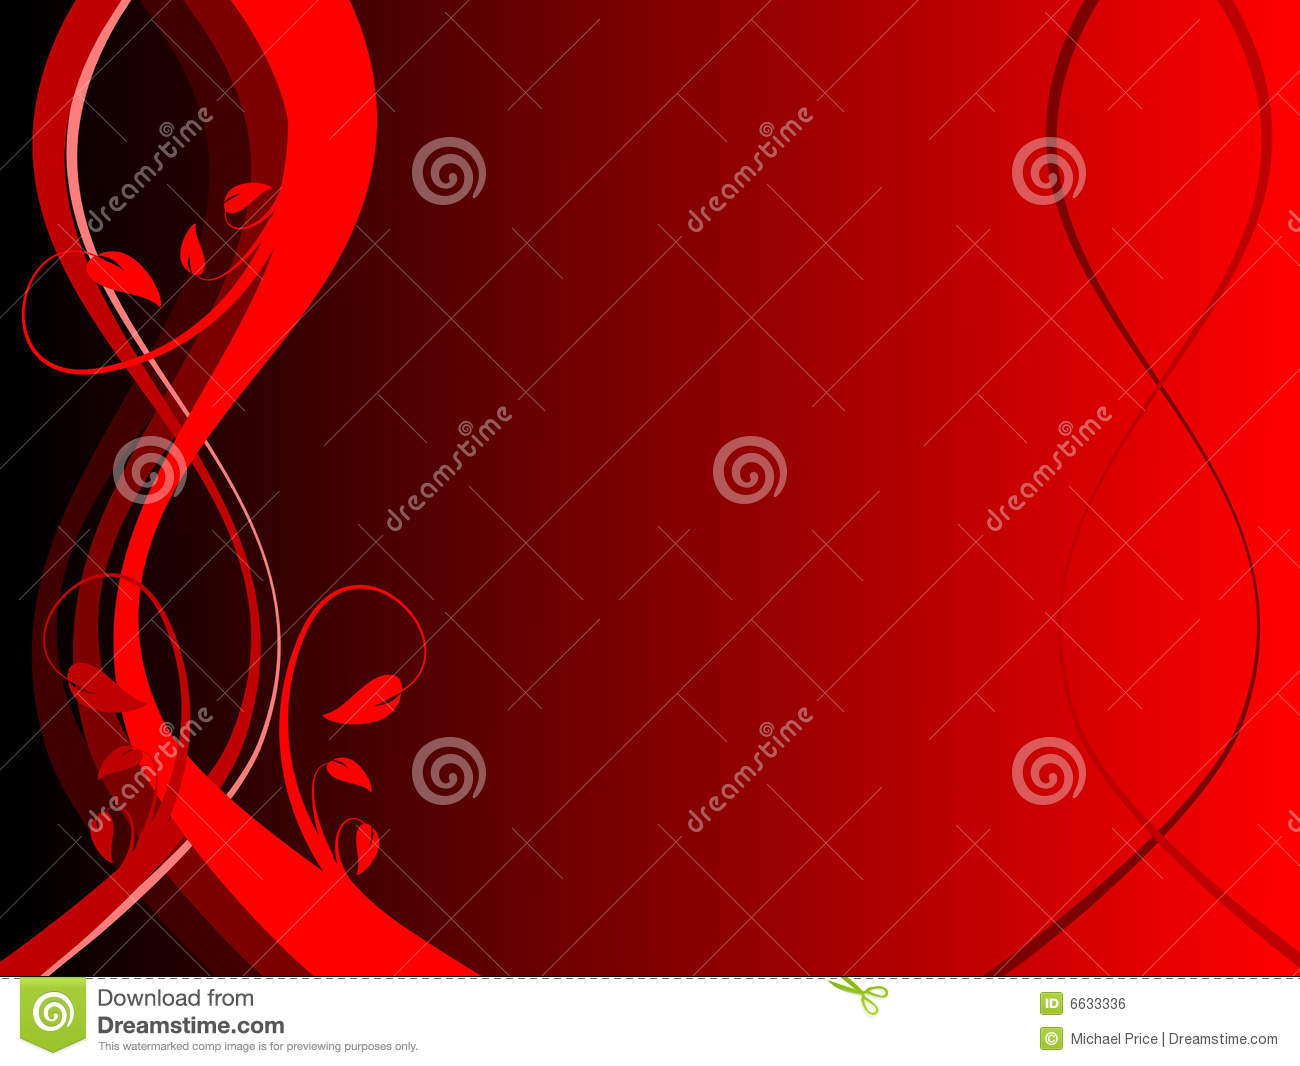 Red Abstract Floral Design